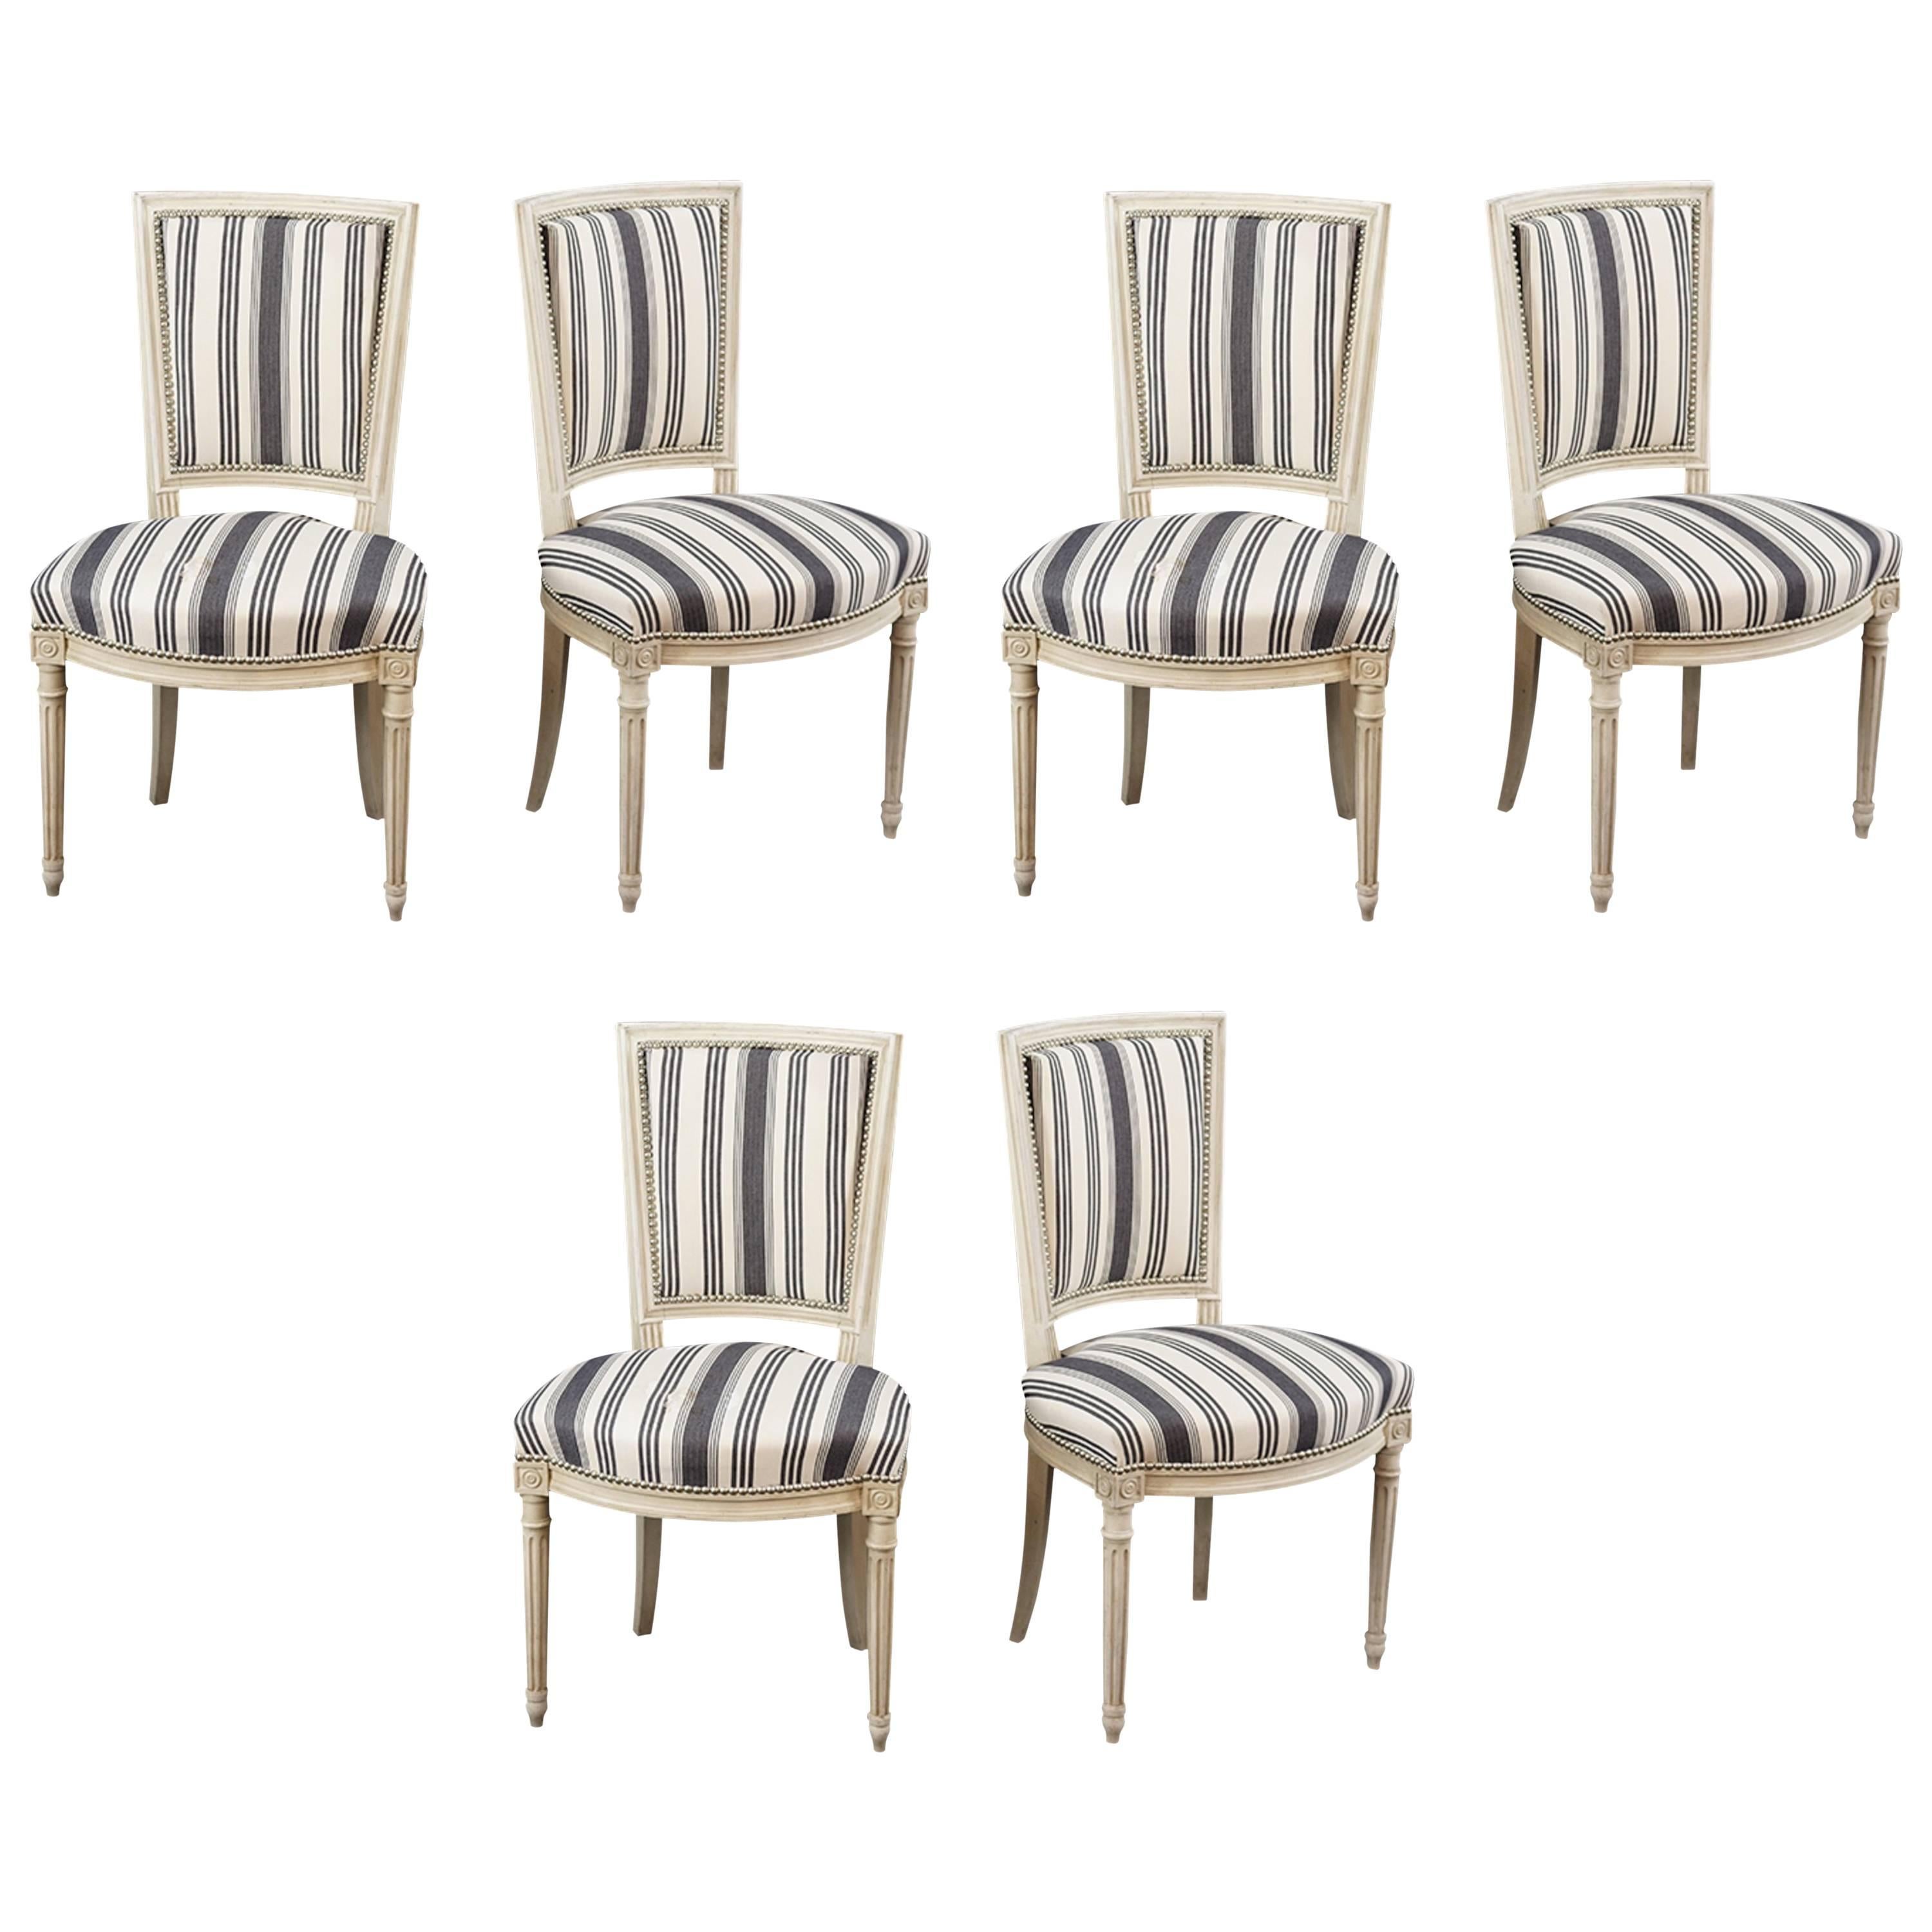 Handsome Set of Six Louis XVI Style Side Chairs Covered in Blue and White Stripe For Sale